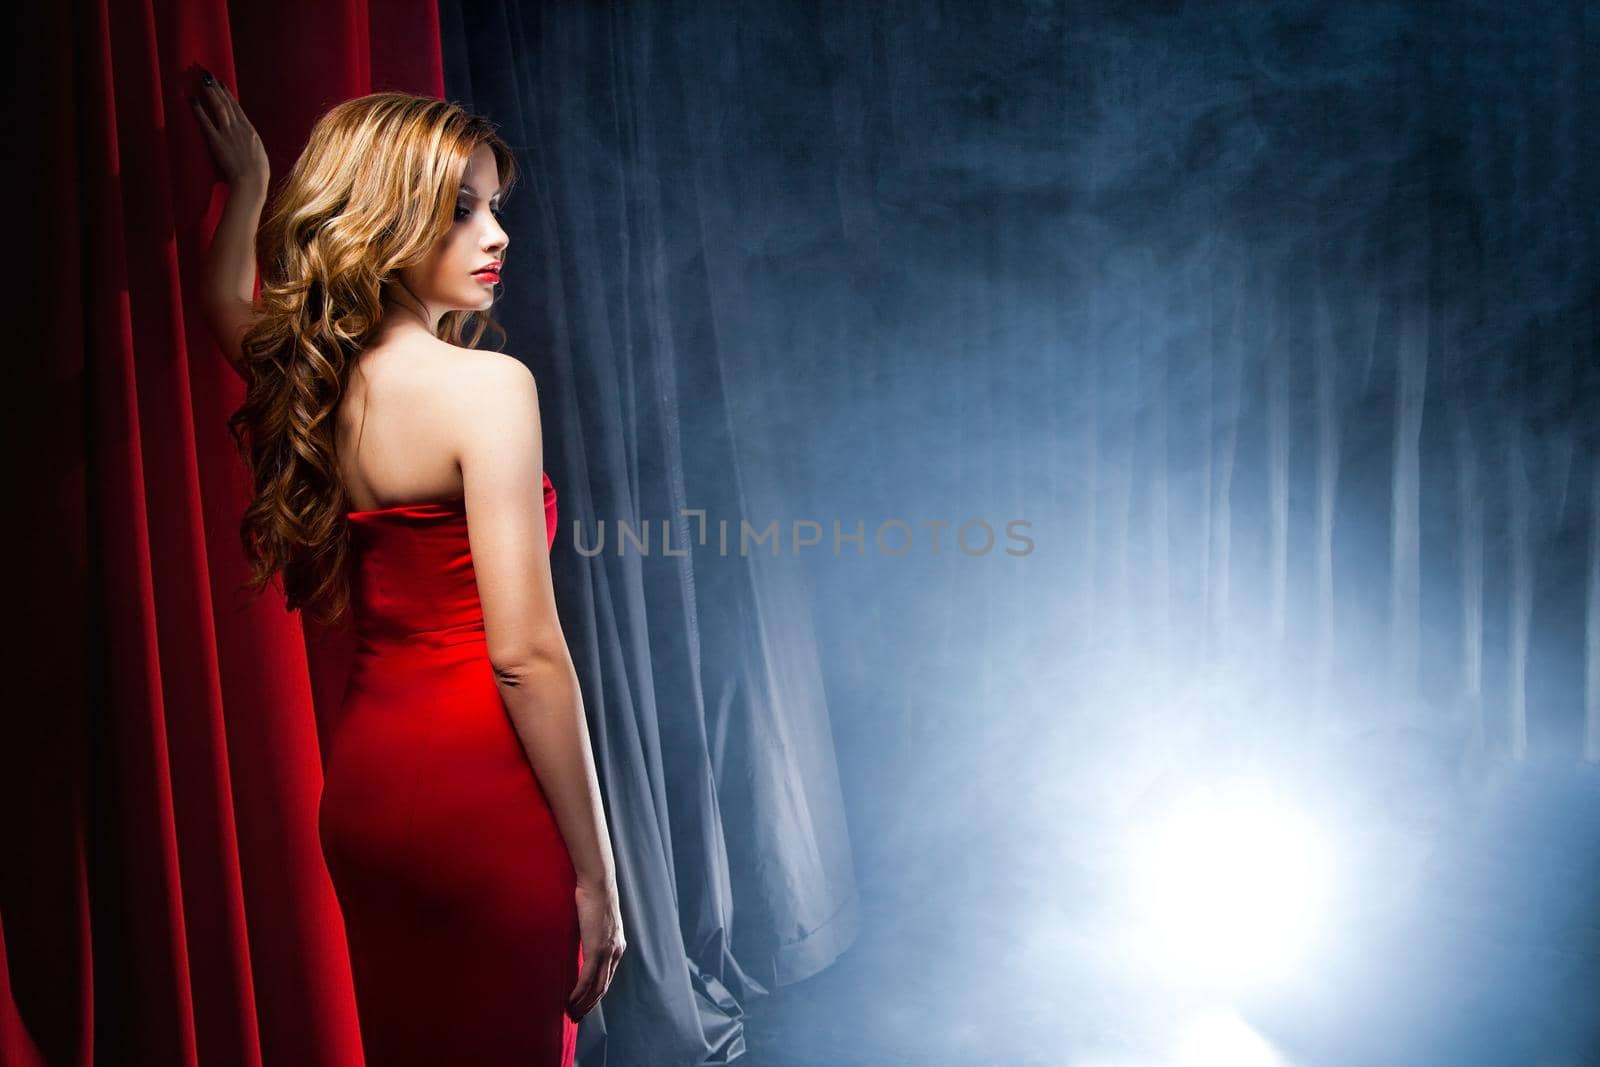 Portrait of a beautiful woman posing in a red dress in front of the scenes